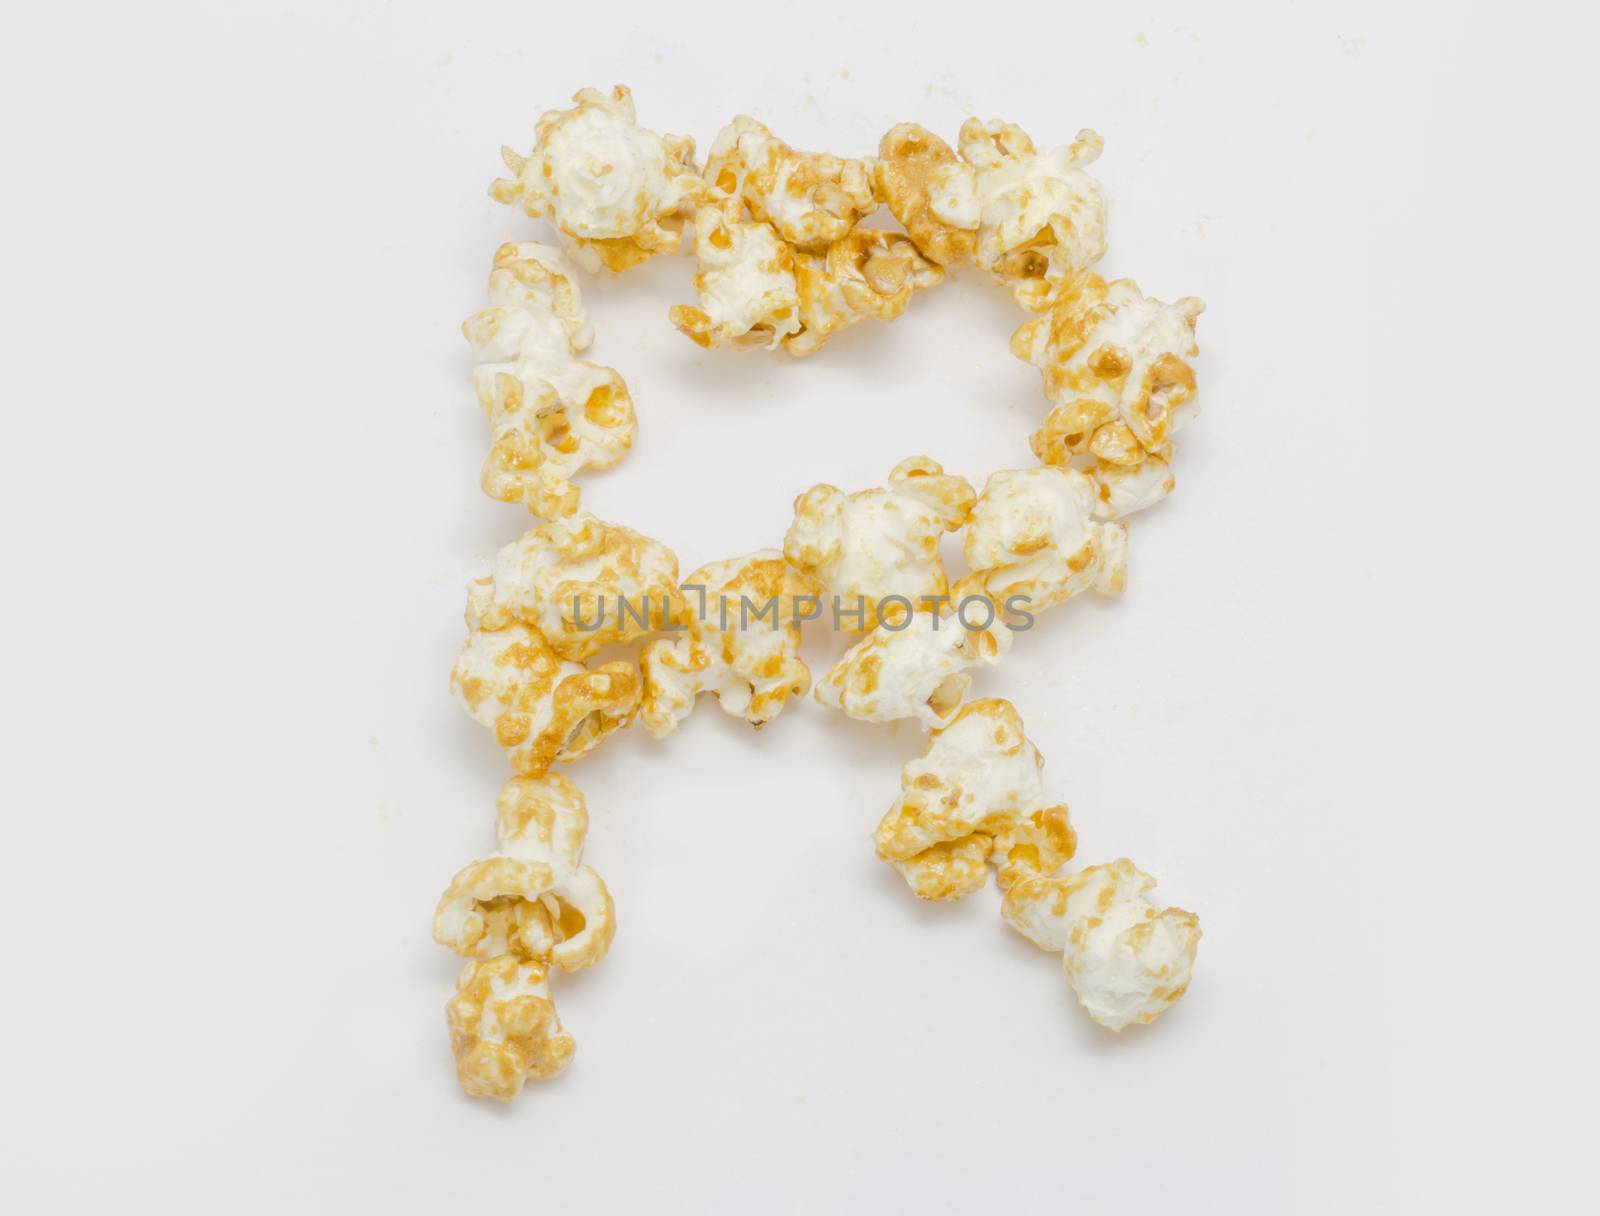 pop corn forming letter R isolated on white background